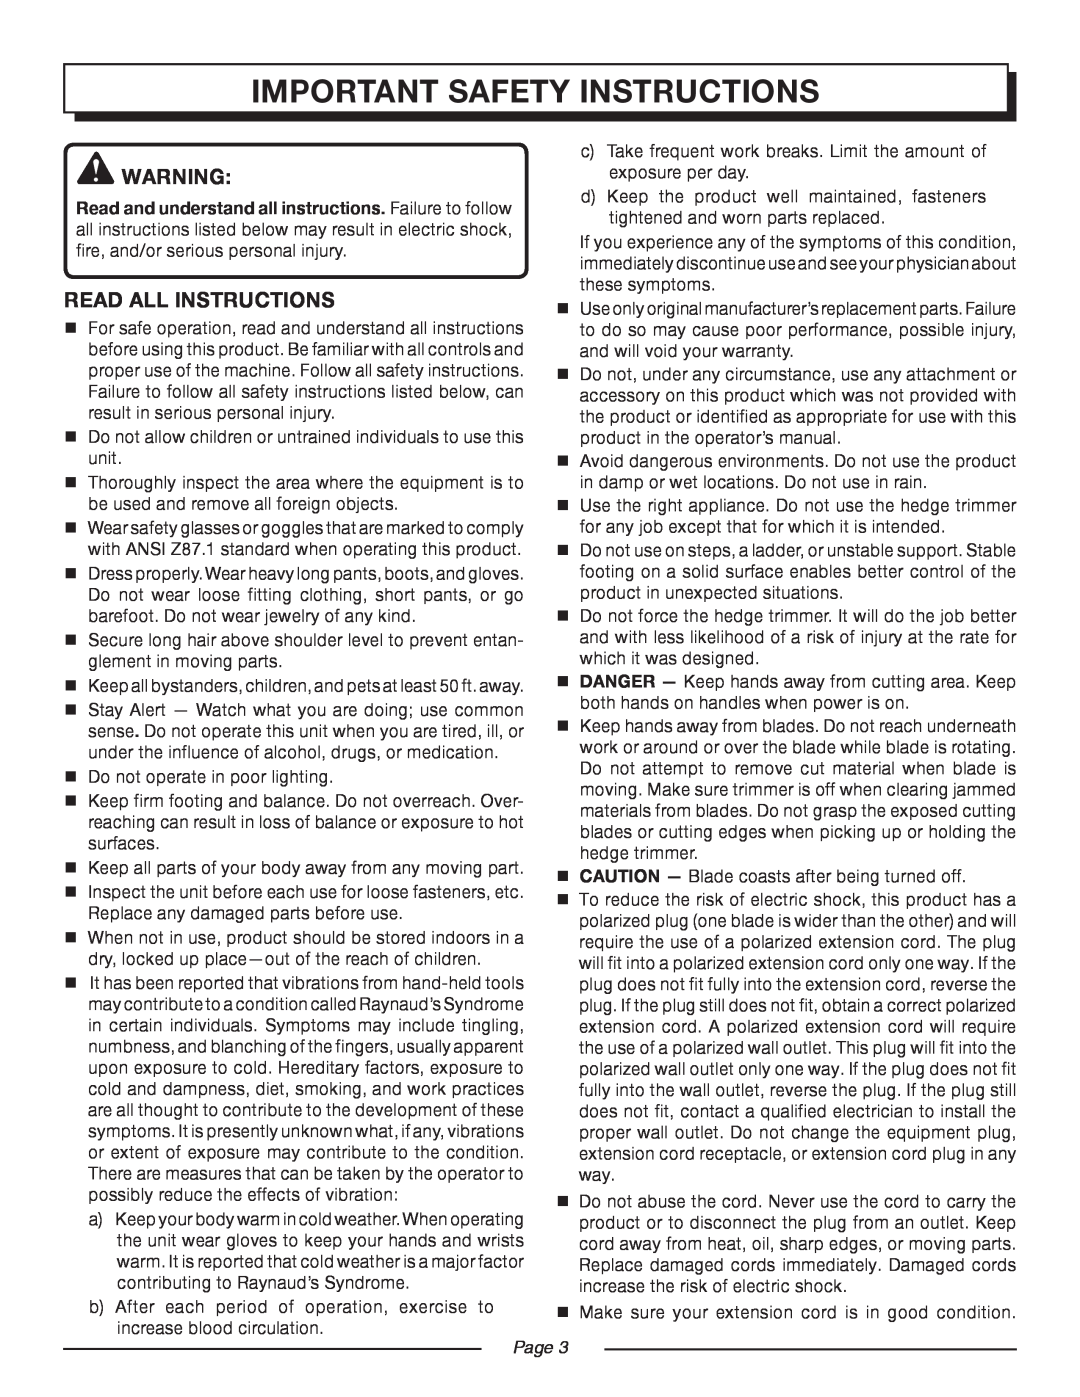 Homelite UT 44100 manual important safety instructions, read all instructions, Page  